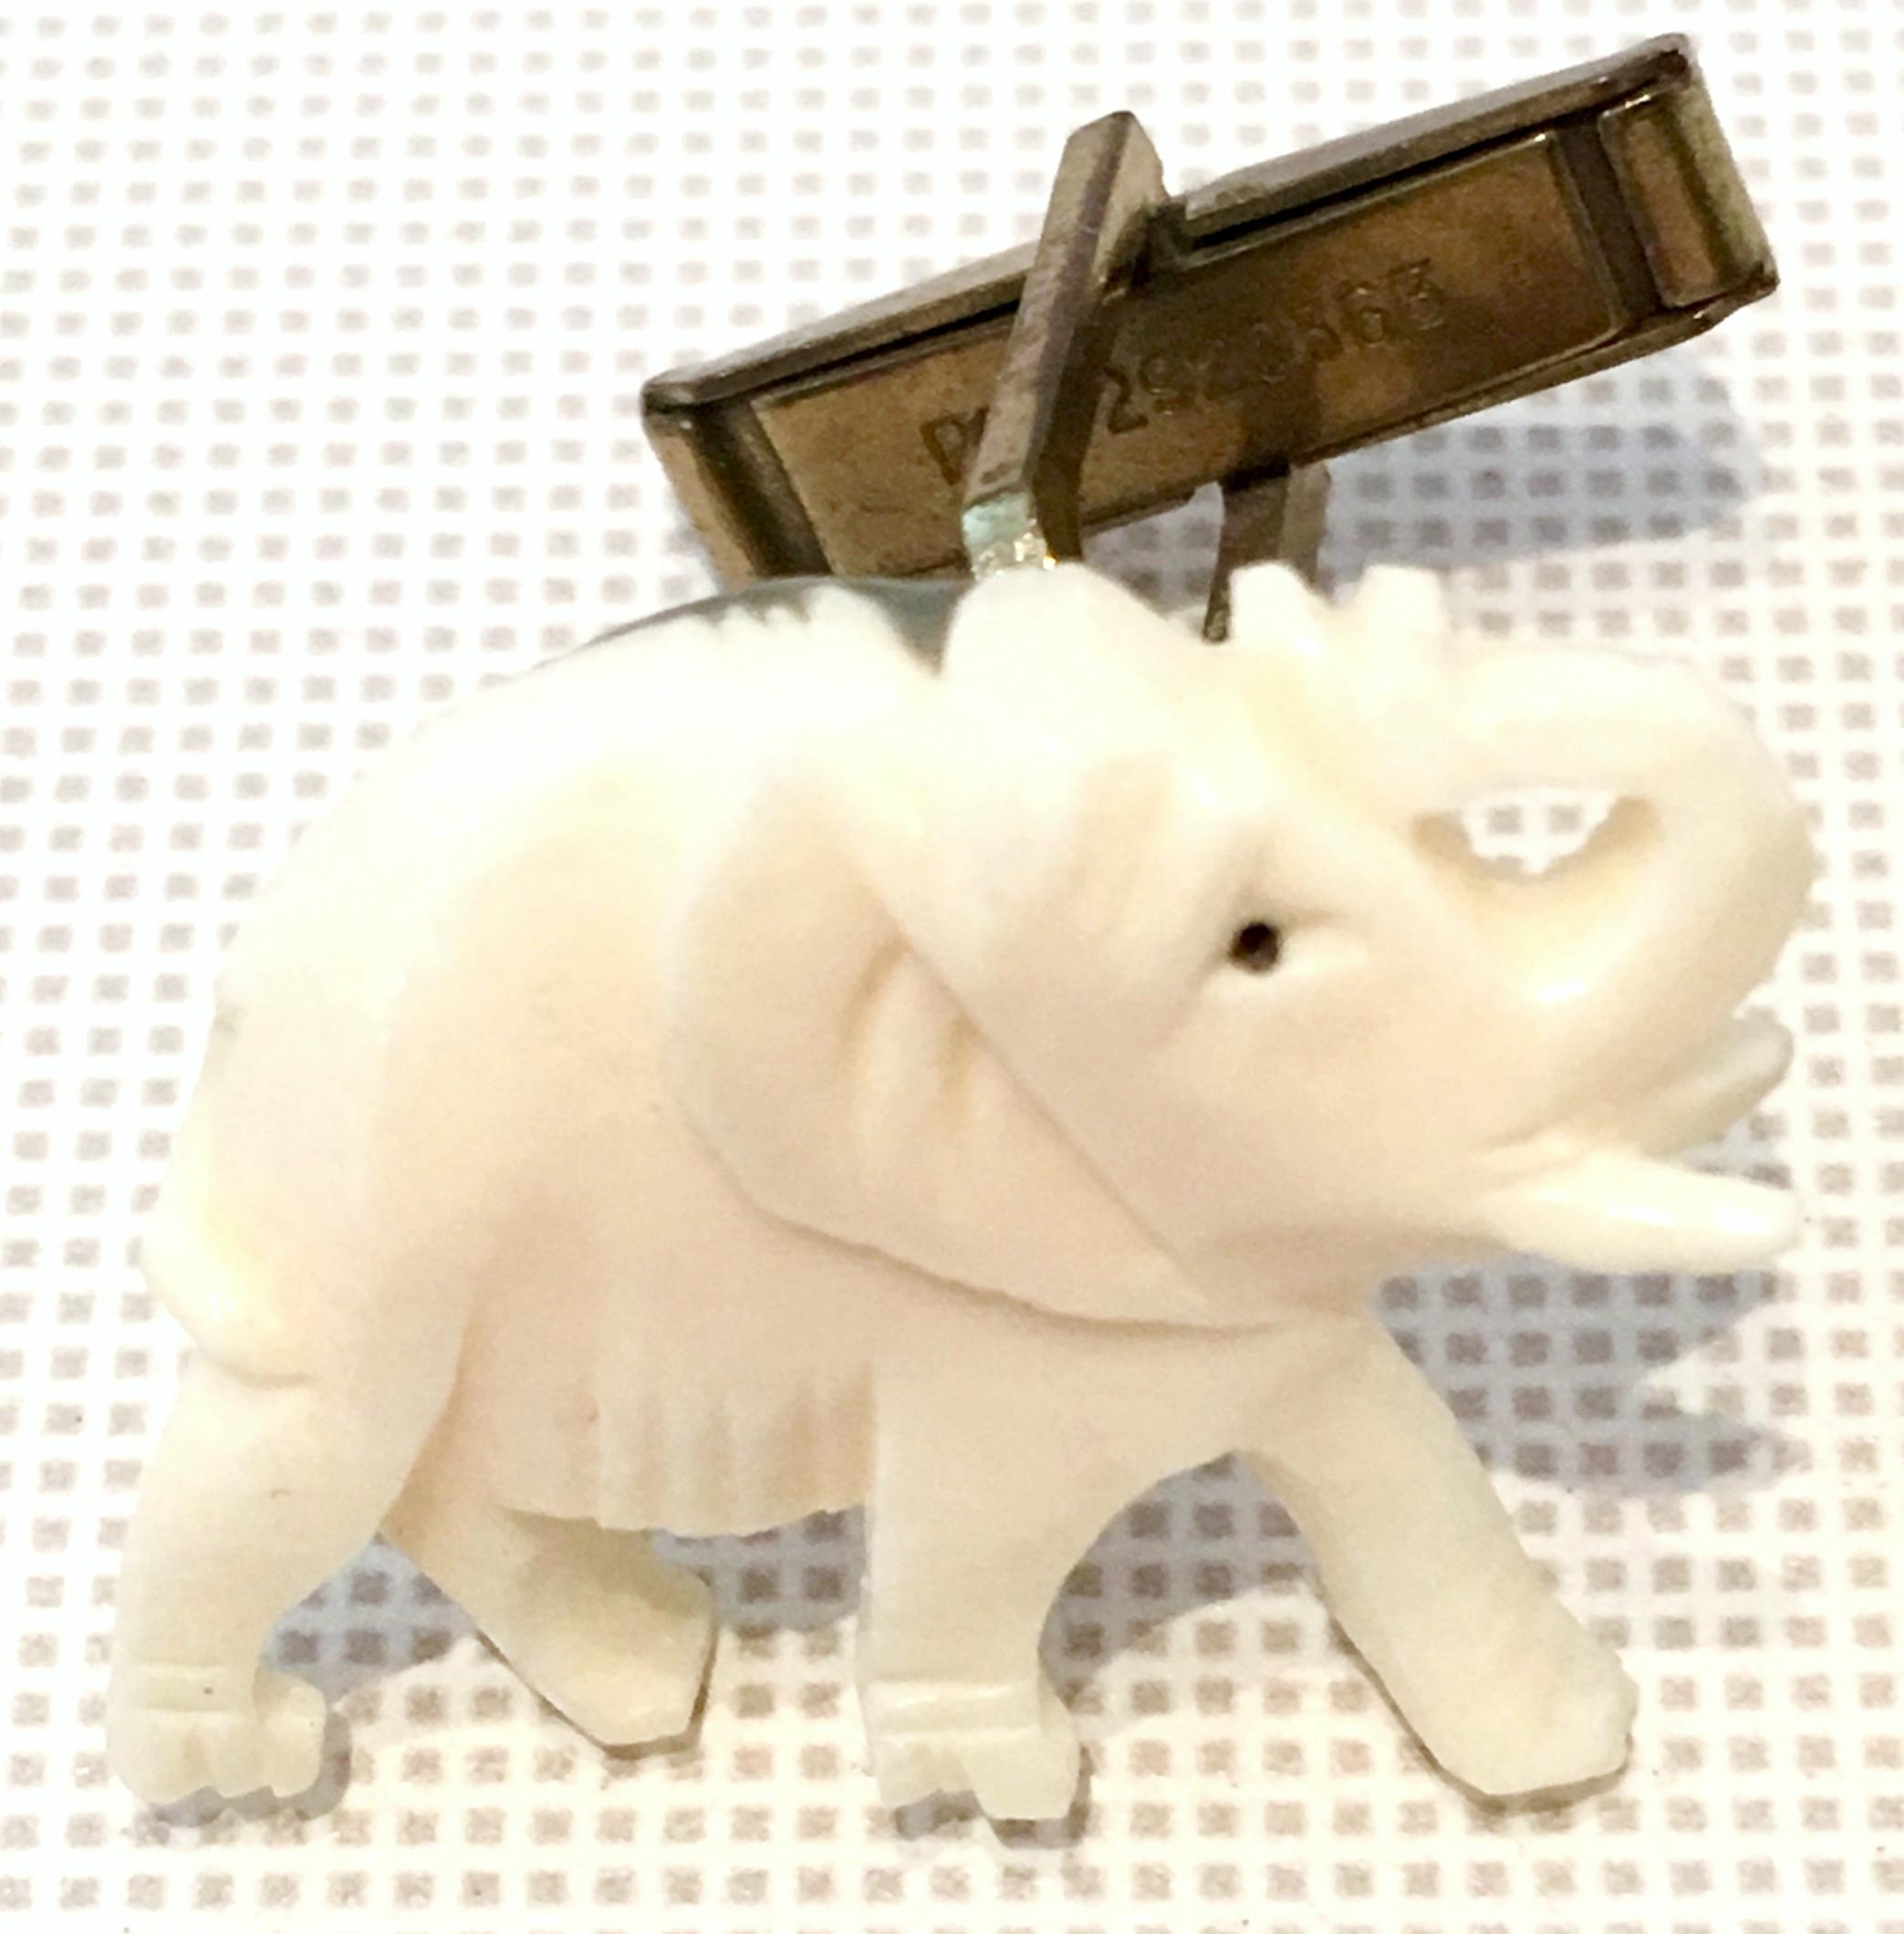 Women's or Men's Mid-20th Century Carved Bone & Jade Good Luck Elephant Cuff Links By, Swank